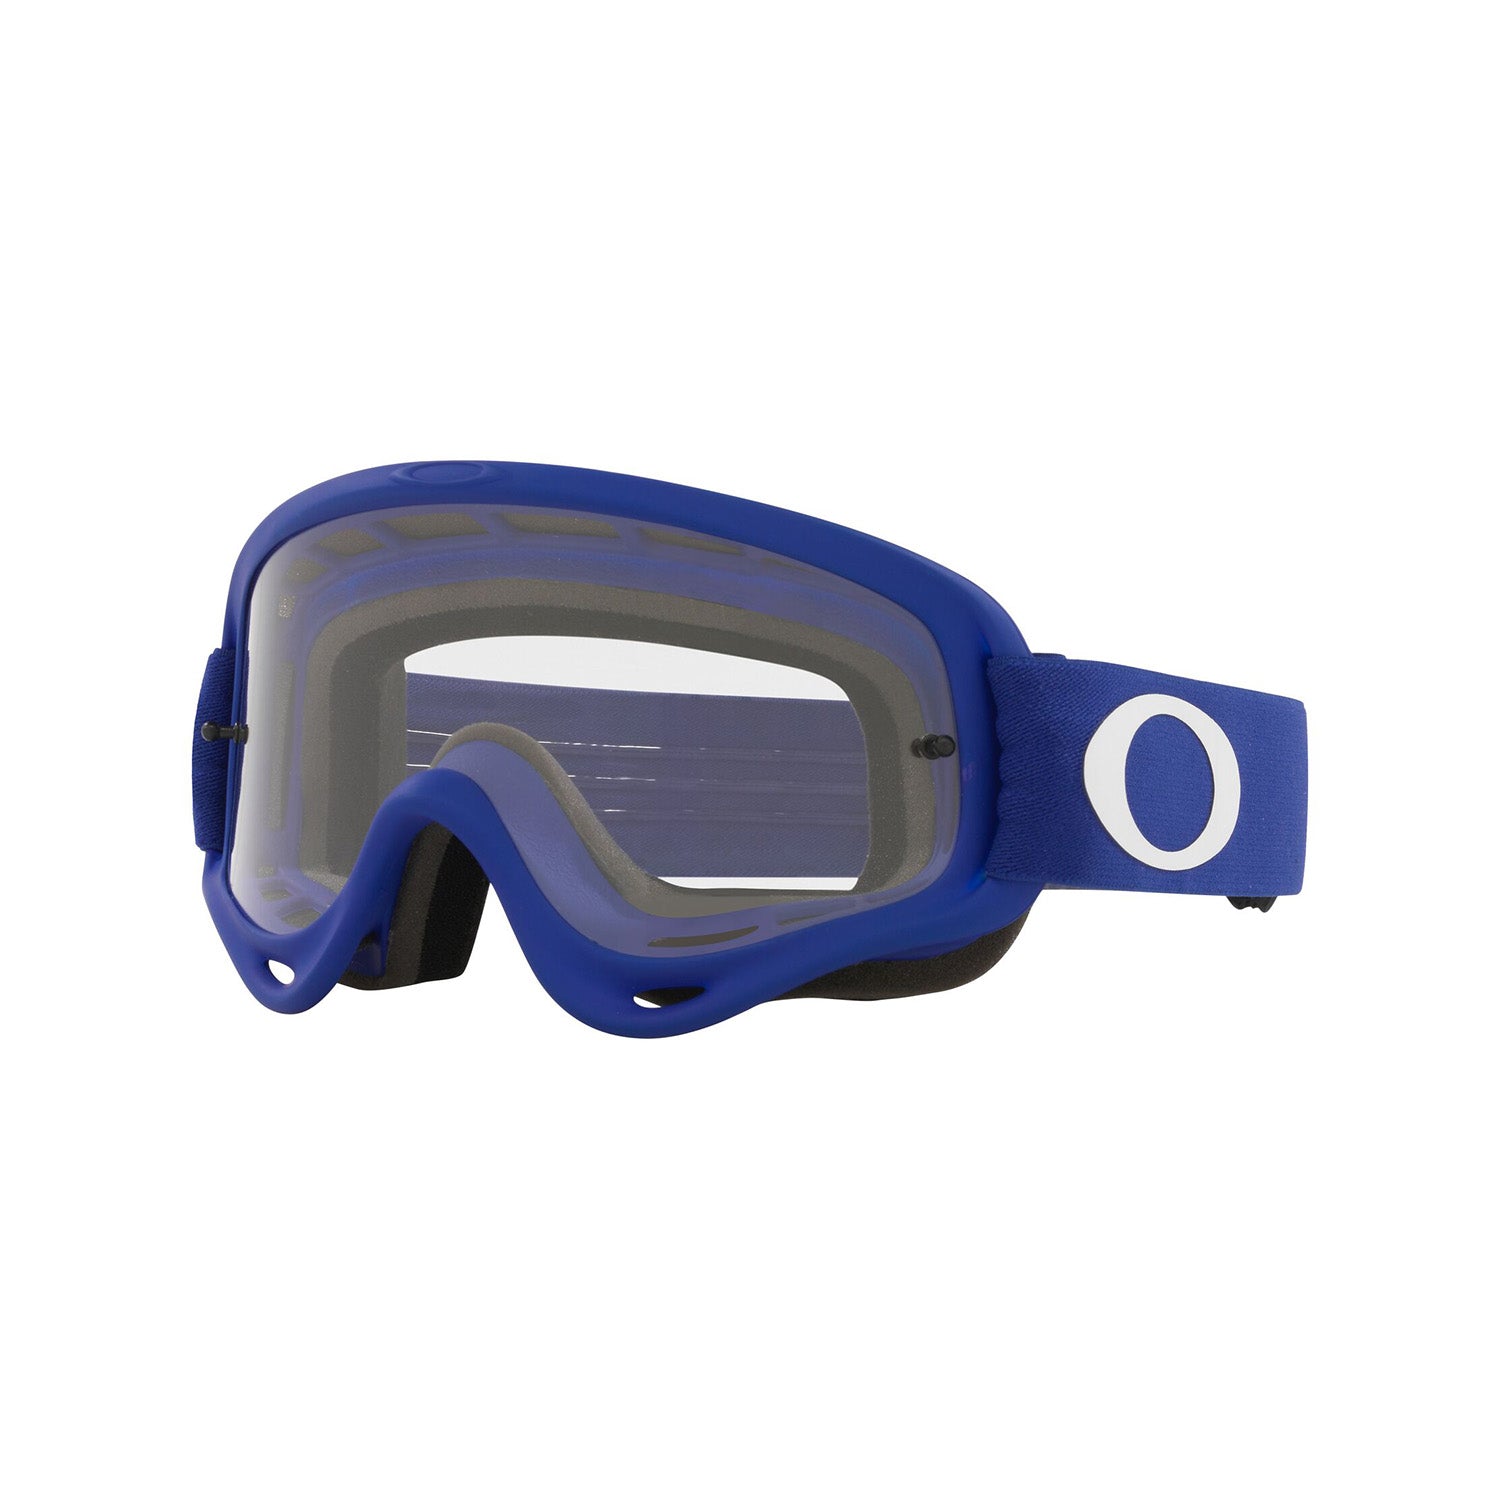 Oakley O Frame MX Goggle in Moto Blue with Clear Lens